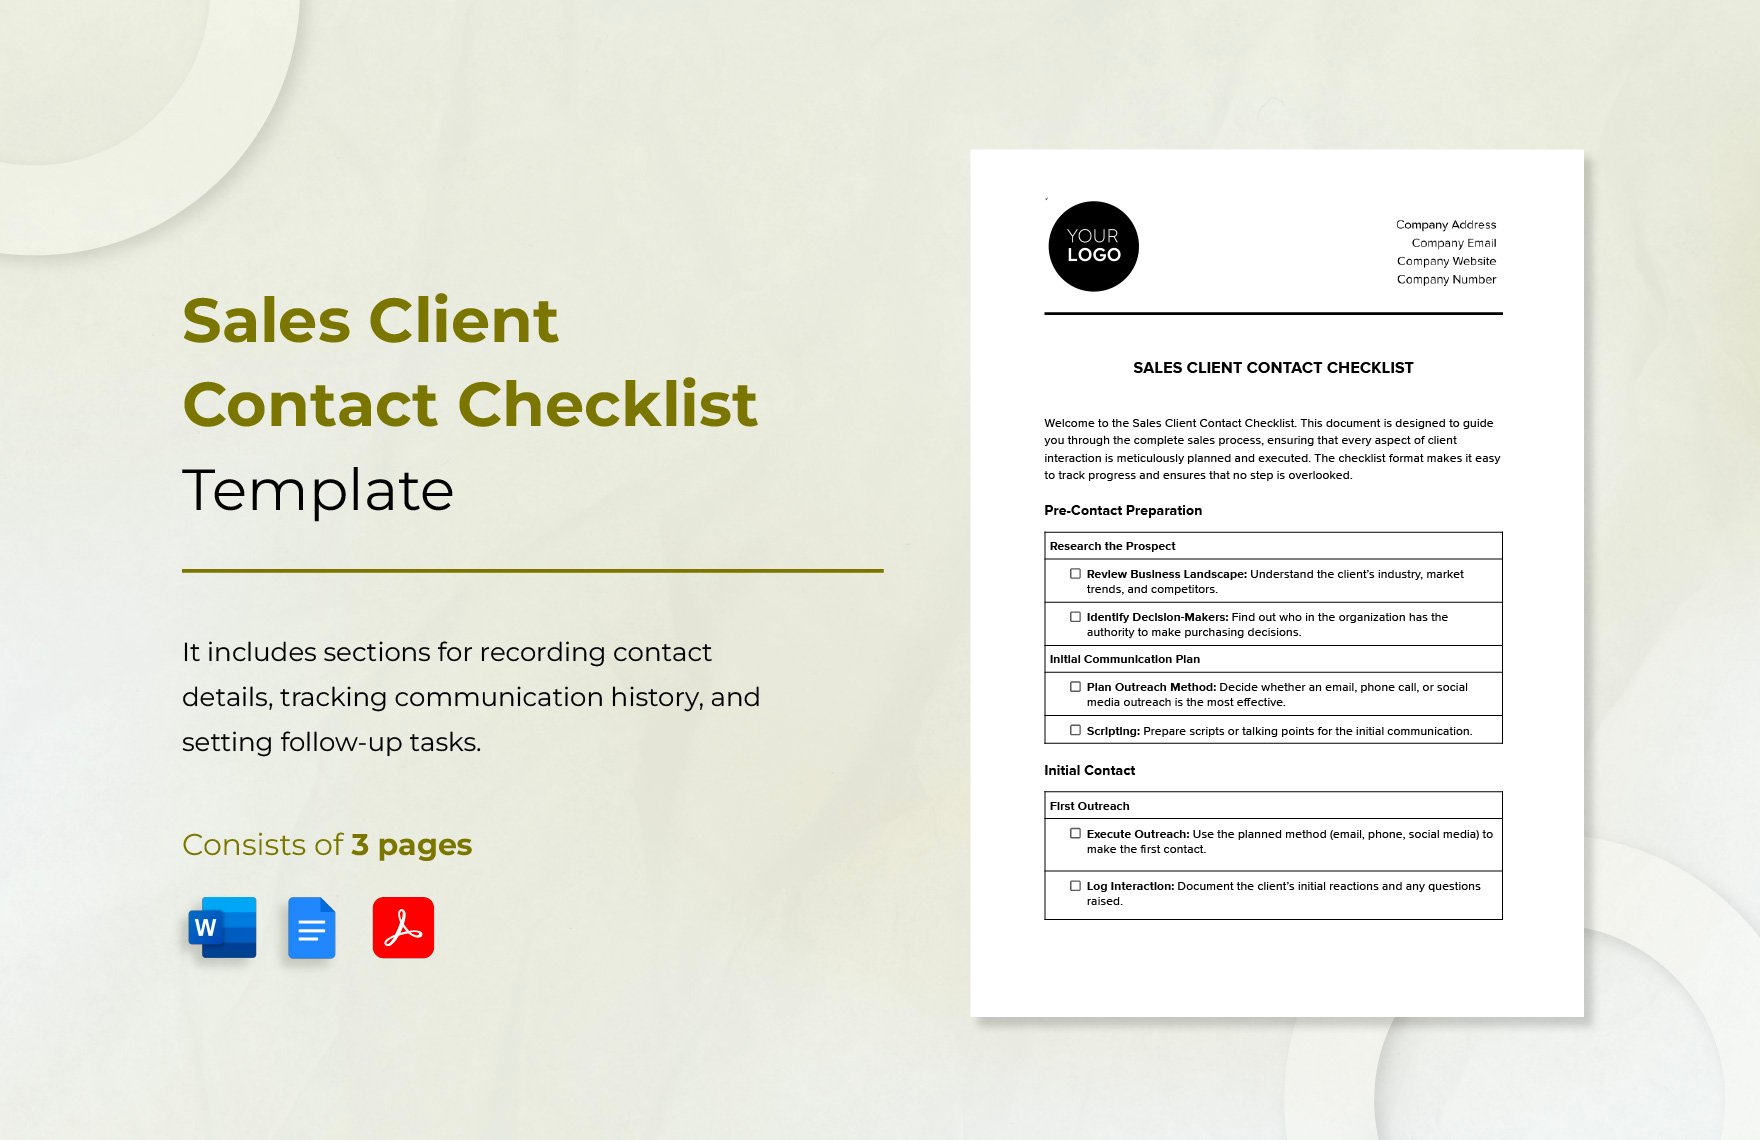 Sales Client Contact Checklist Template in Word, Google Docs, PDF